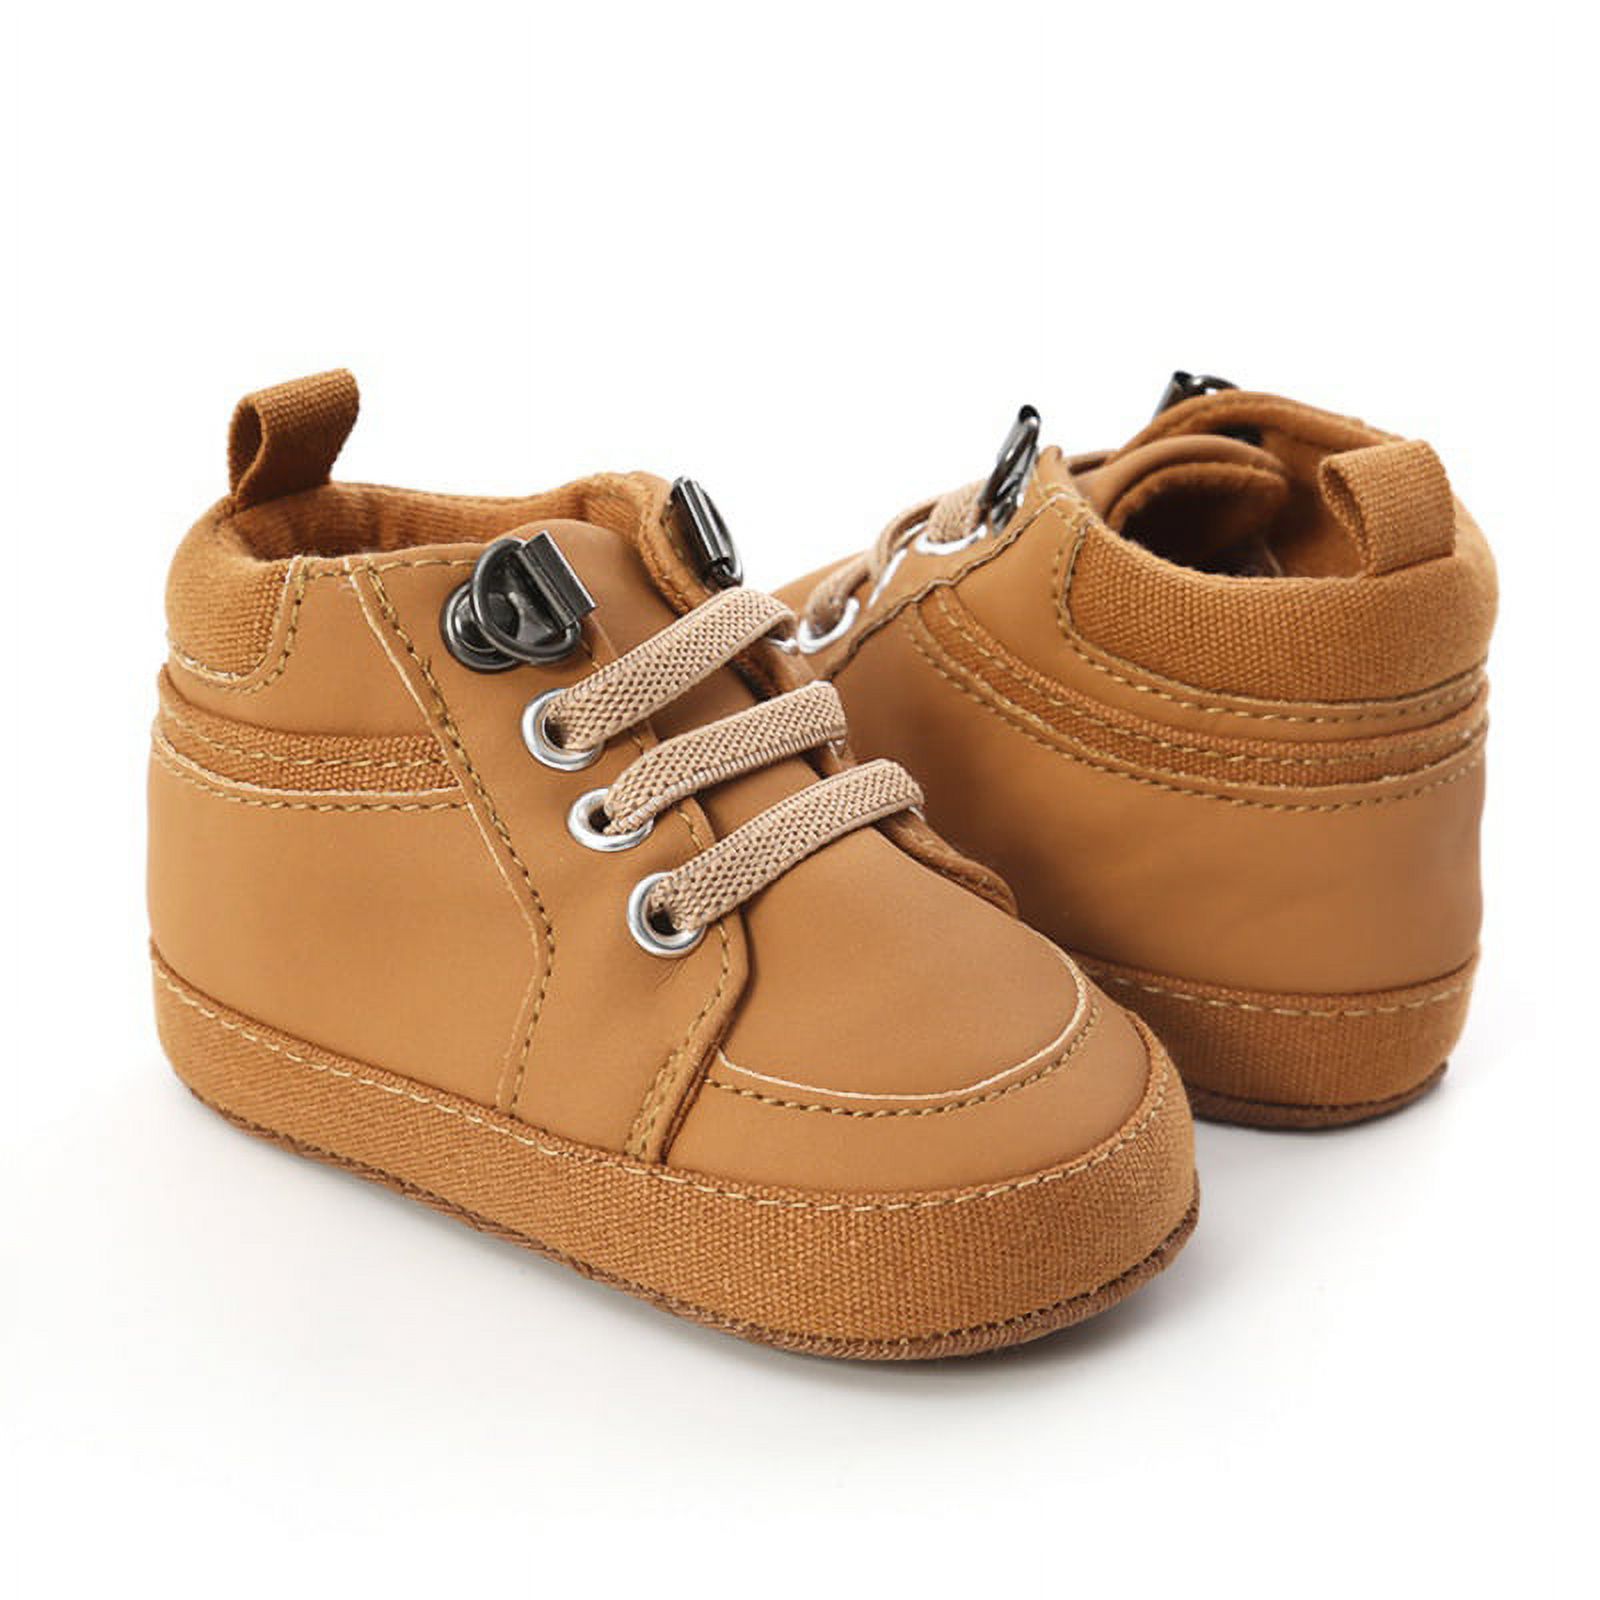 Baby Girls Boys Walking Shoes Toddler Infant First Walker Soft Sole High-Top Ankle Sneakers Newborn Crib Shoe - image 5 of 7